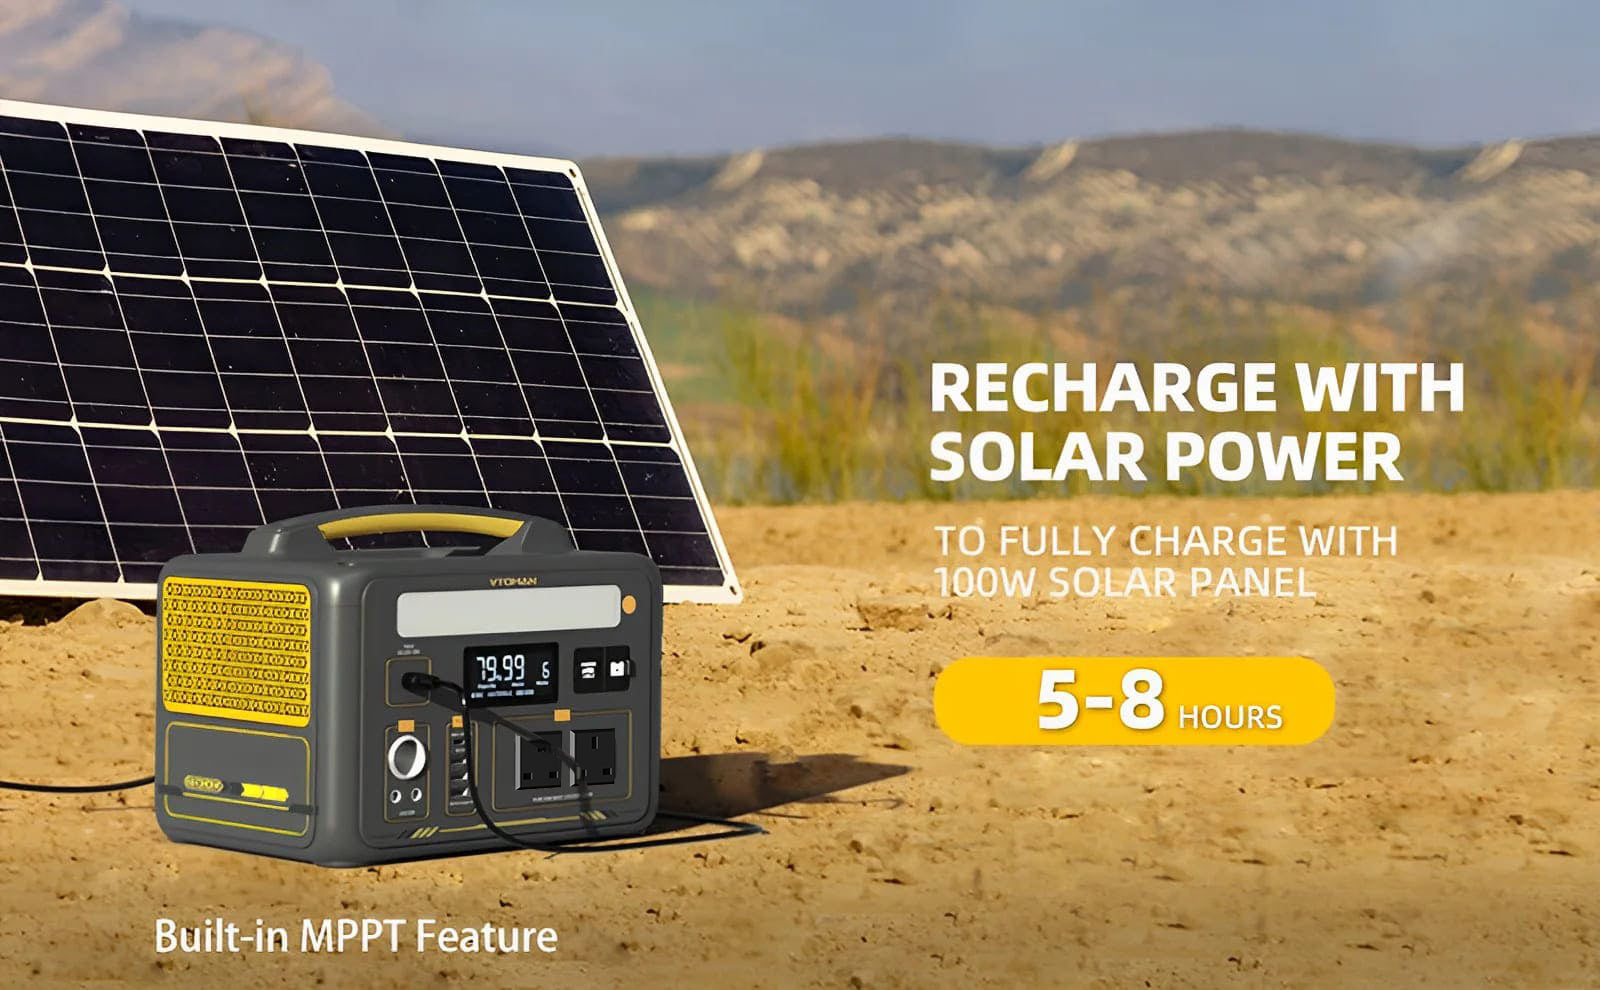 vtoman portable power station supports use with solar panels